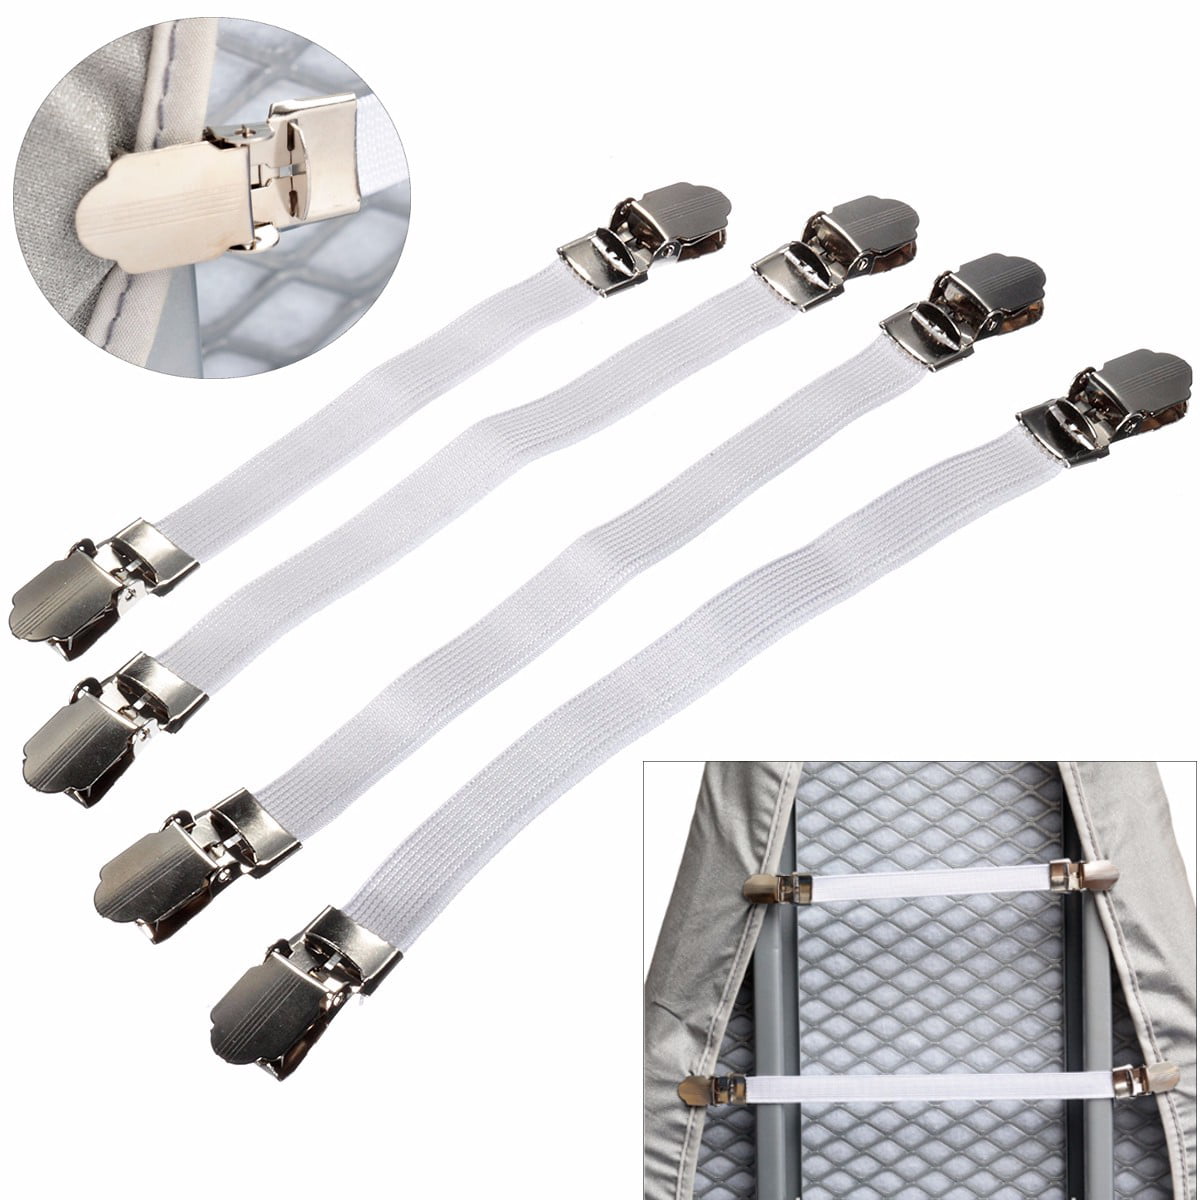 ASAB Pack of 4 Fasteners Ironing Board Cover Elastic Ties Tight Fit For Bed Sheets Gripper Brace Strap Metallic Clips to Secure Fabric Stretch to Fit